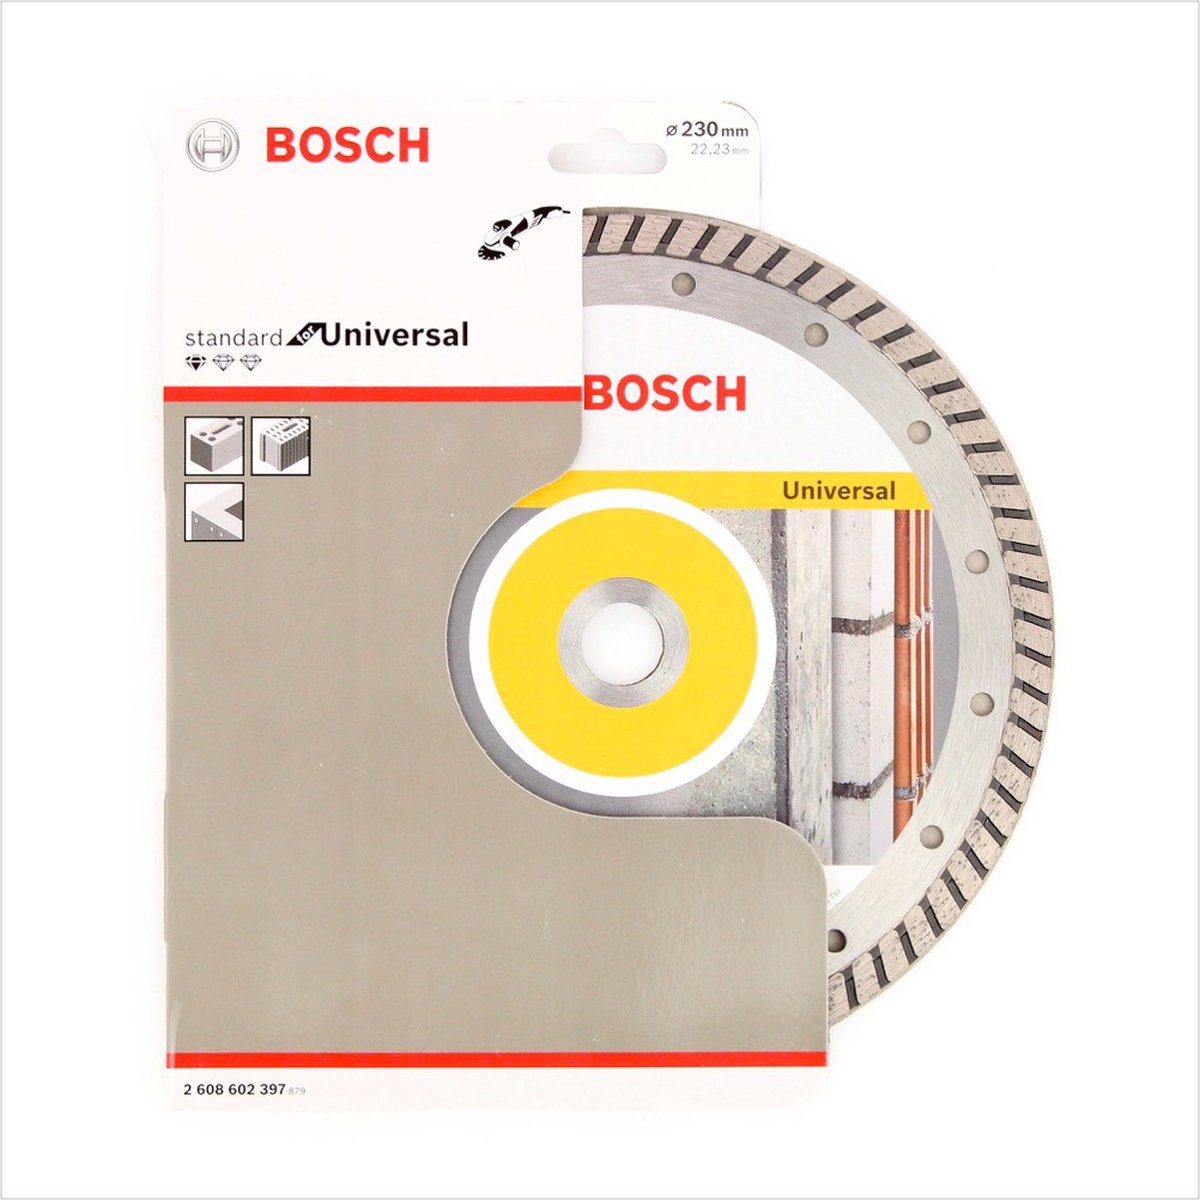 Bosch Standard for Universal Turbo 230mm 2608602397 Power Tool Services